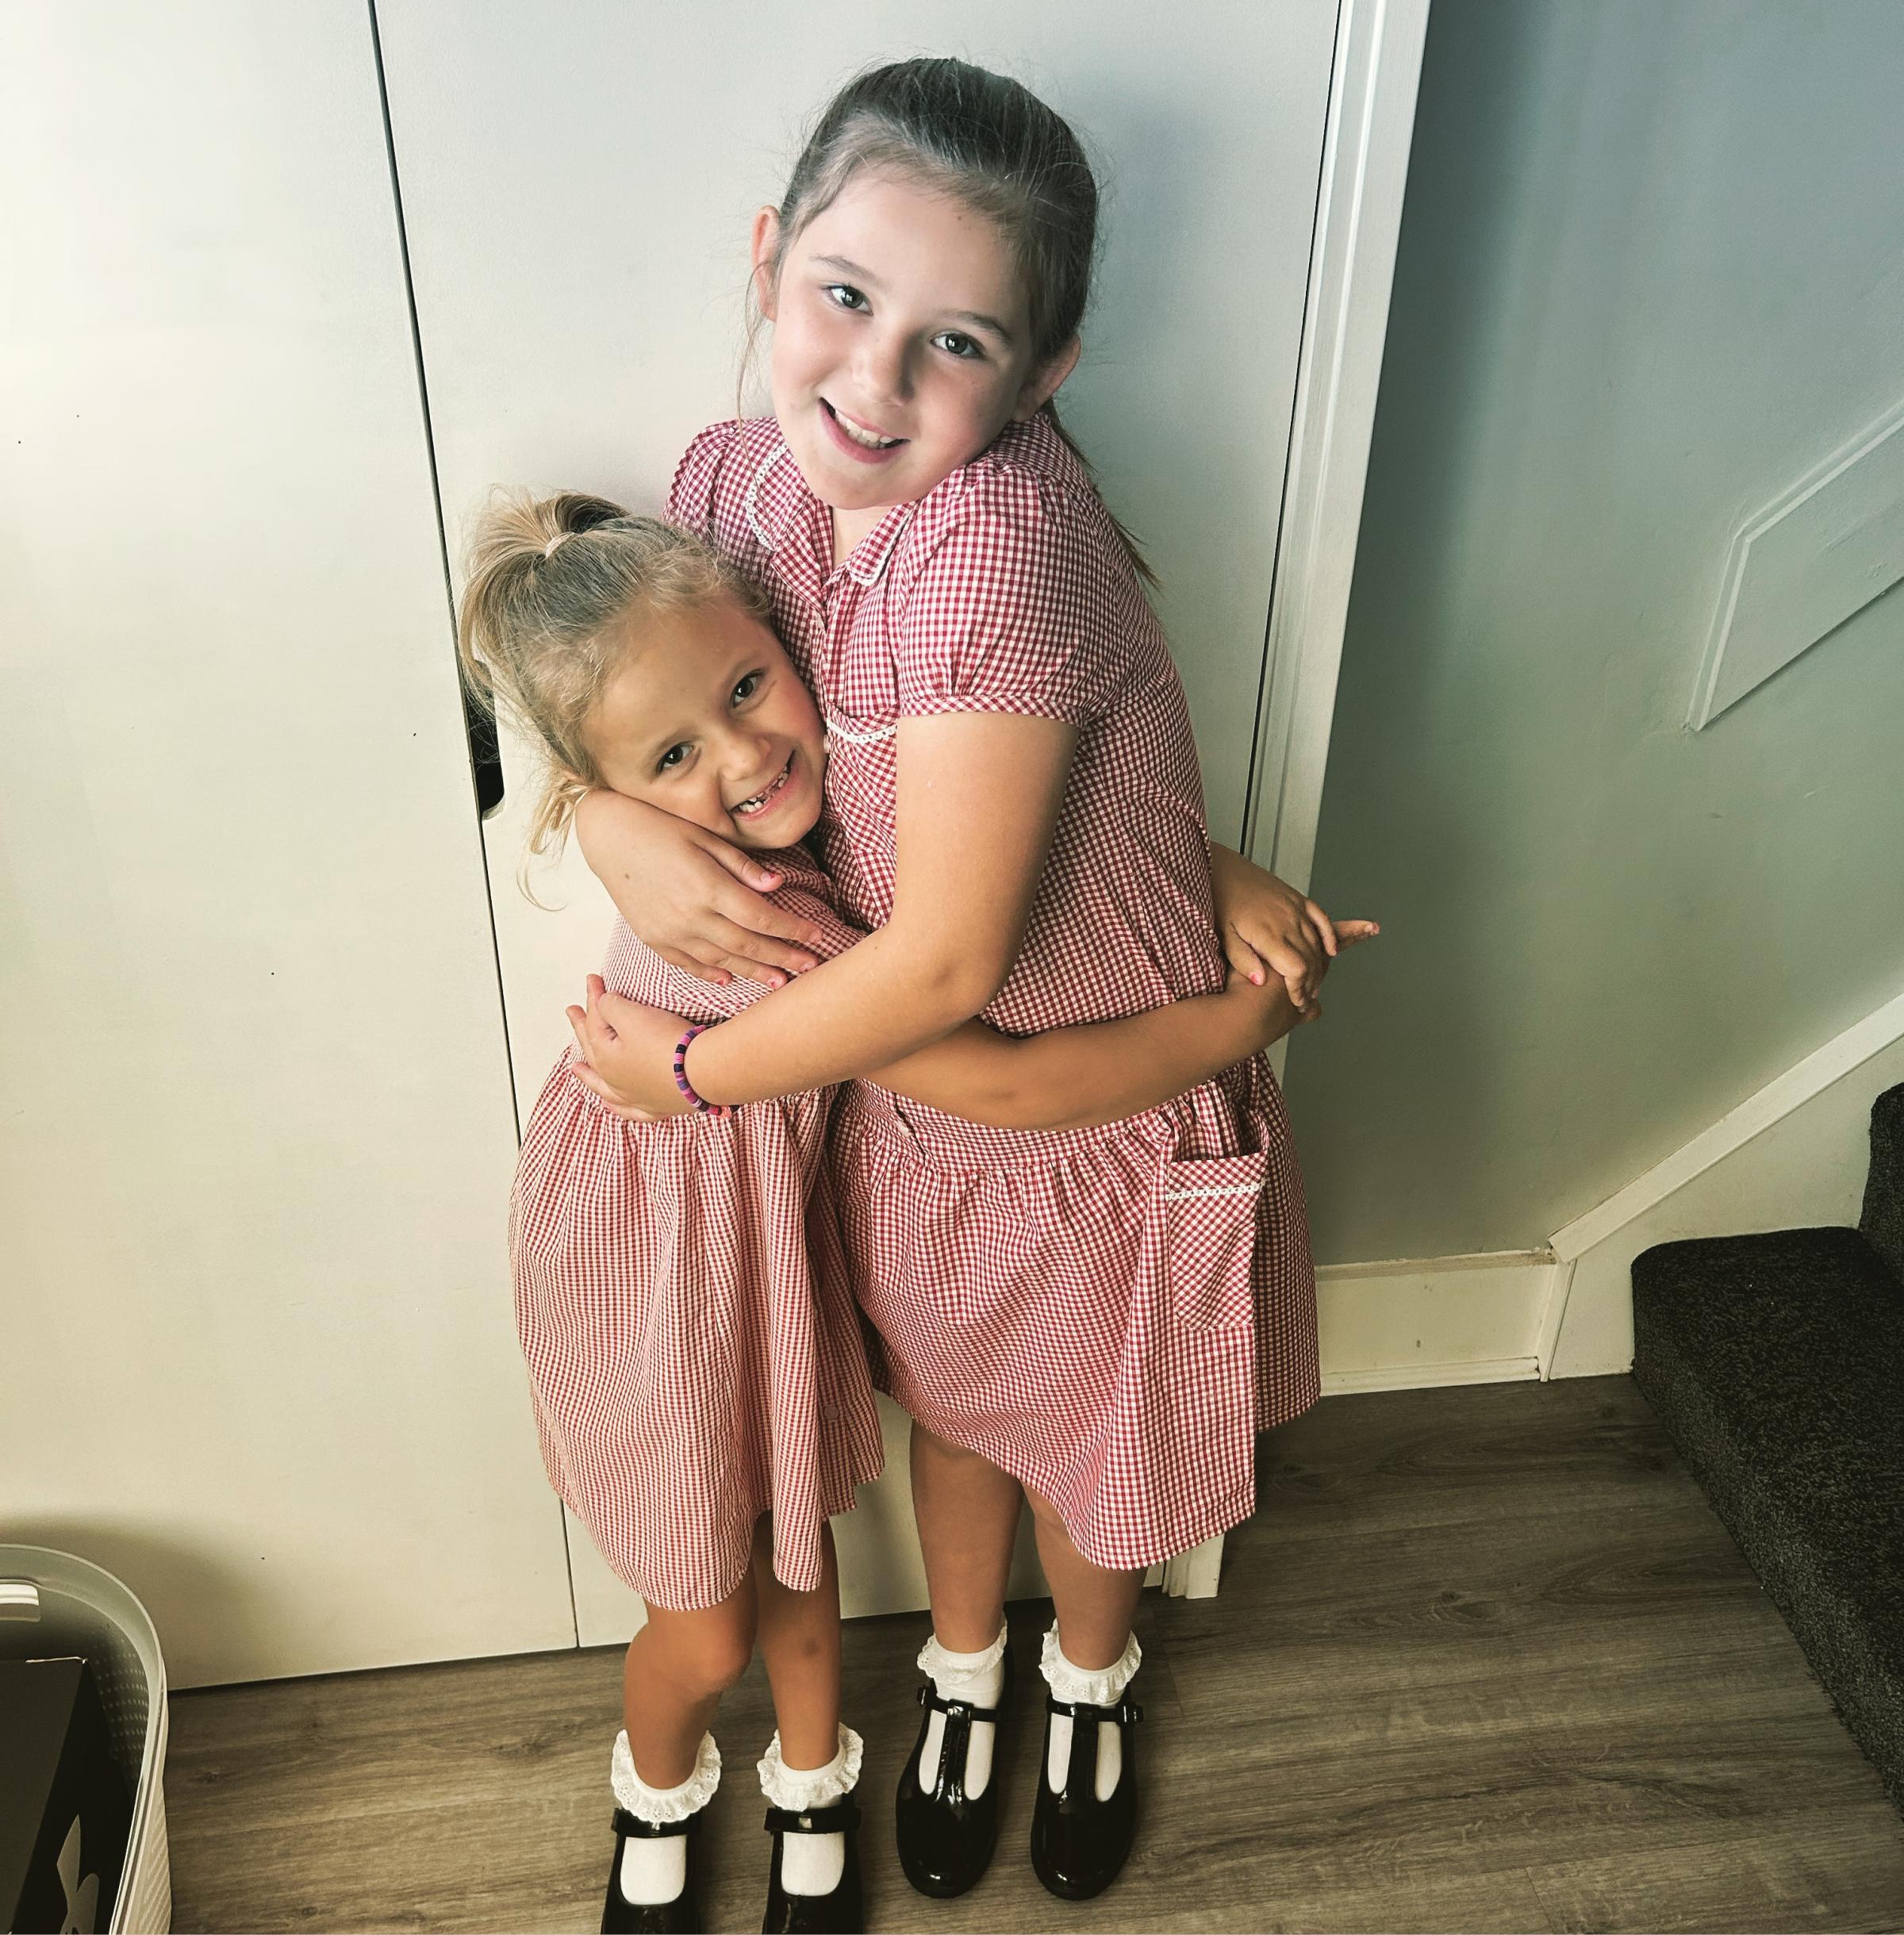 Victoria Cottam, from Cefn Mawr, Wrexham: Effie (left), Year 1 and Macie, Year 4 at Cefn Mawr Primary School - sisters and best friends.